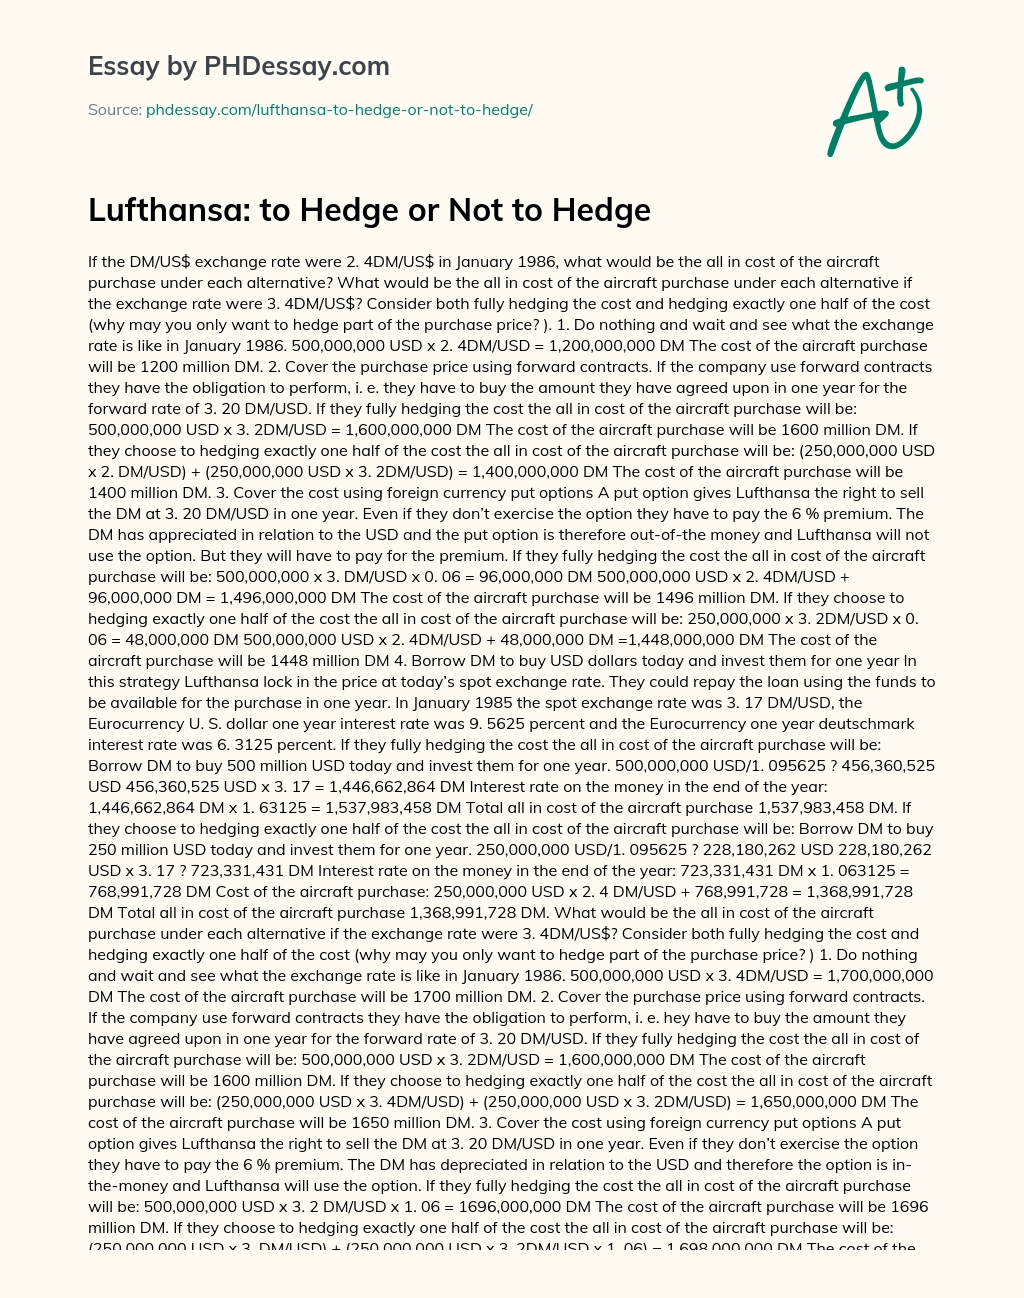 Lufthansa: to Hedge or Not to Hedge essay